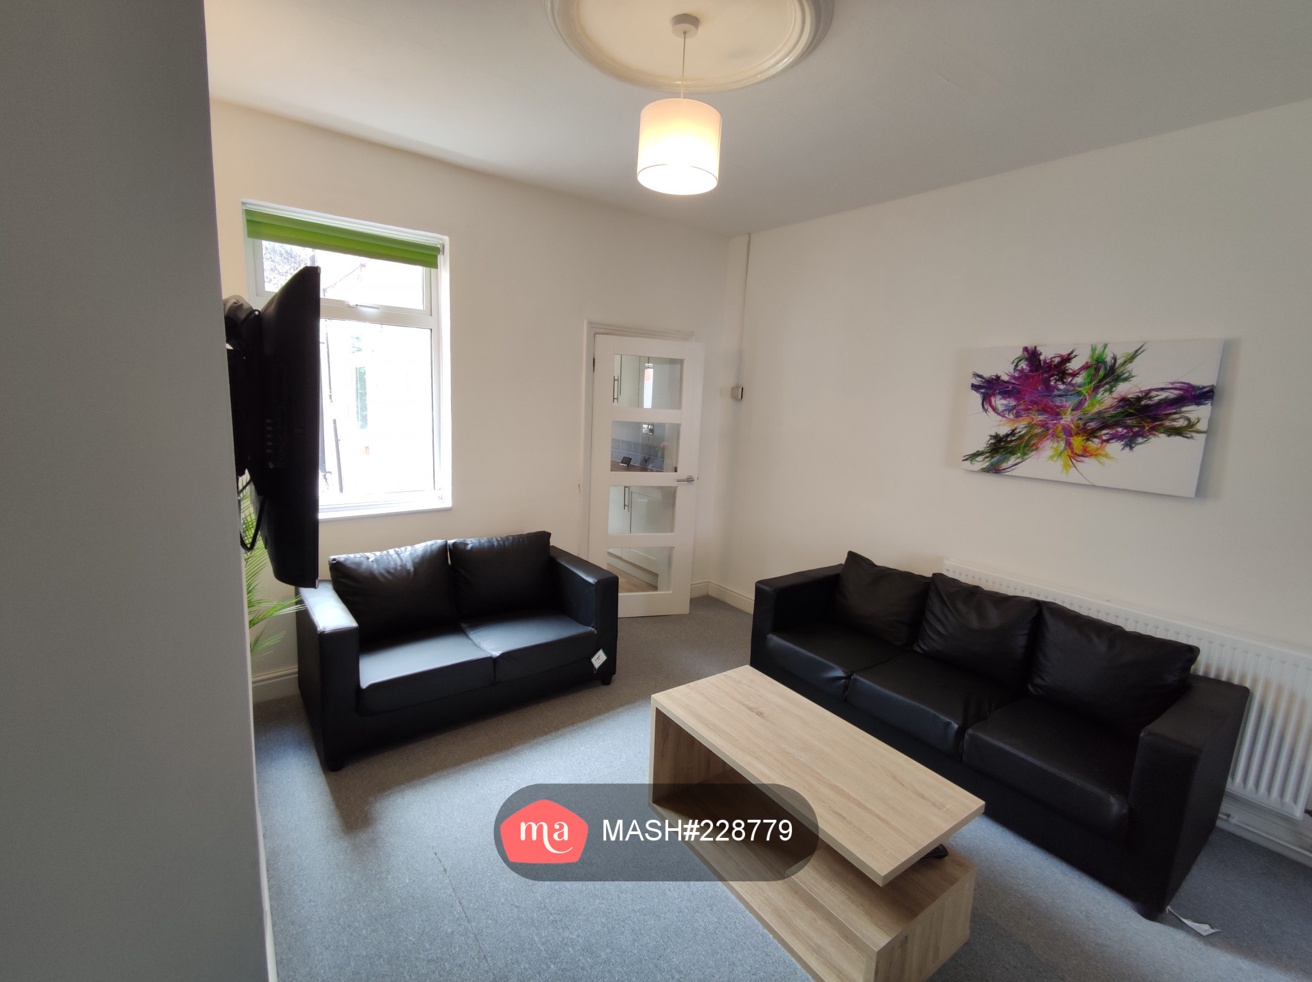 3 Bedroom Terraced to rent in Leicester - Mashroom